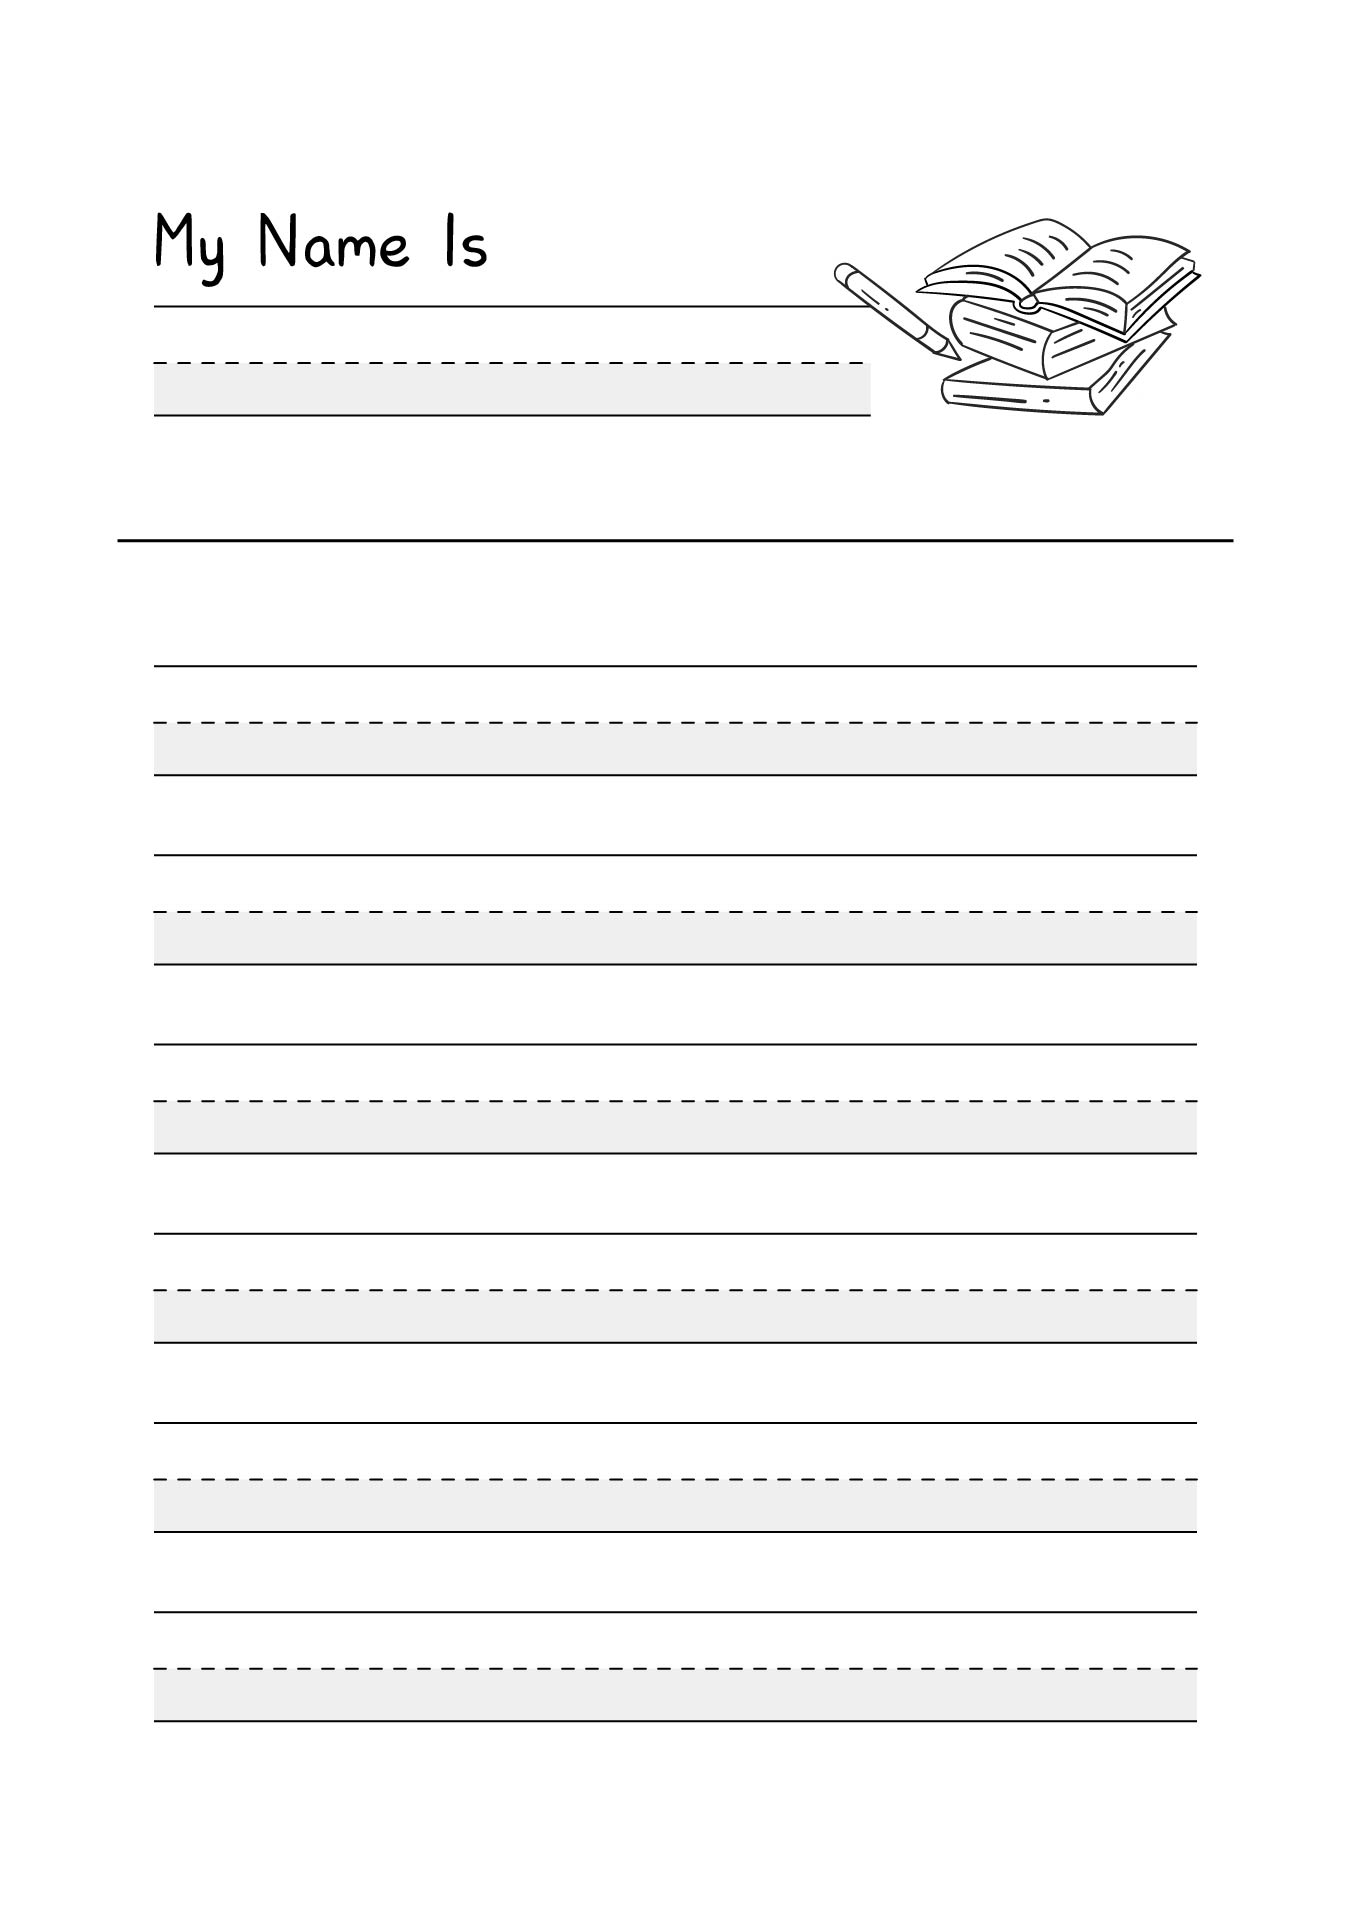 8-best-images-of-1st-grade-handwriting-printables-1st-grade-writing